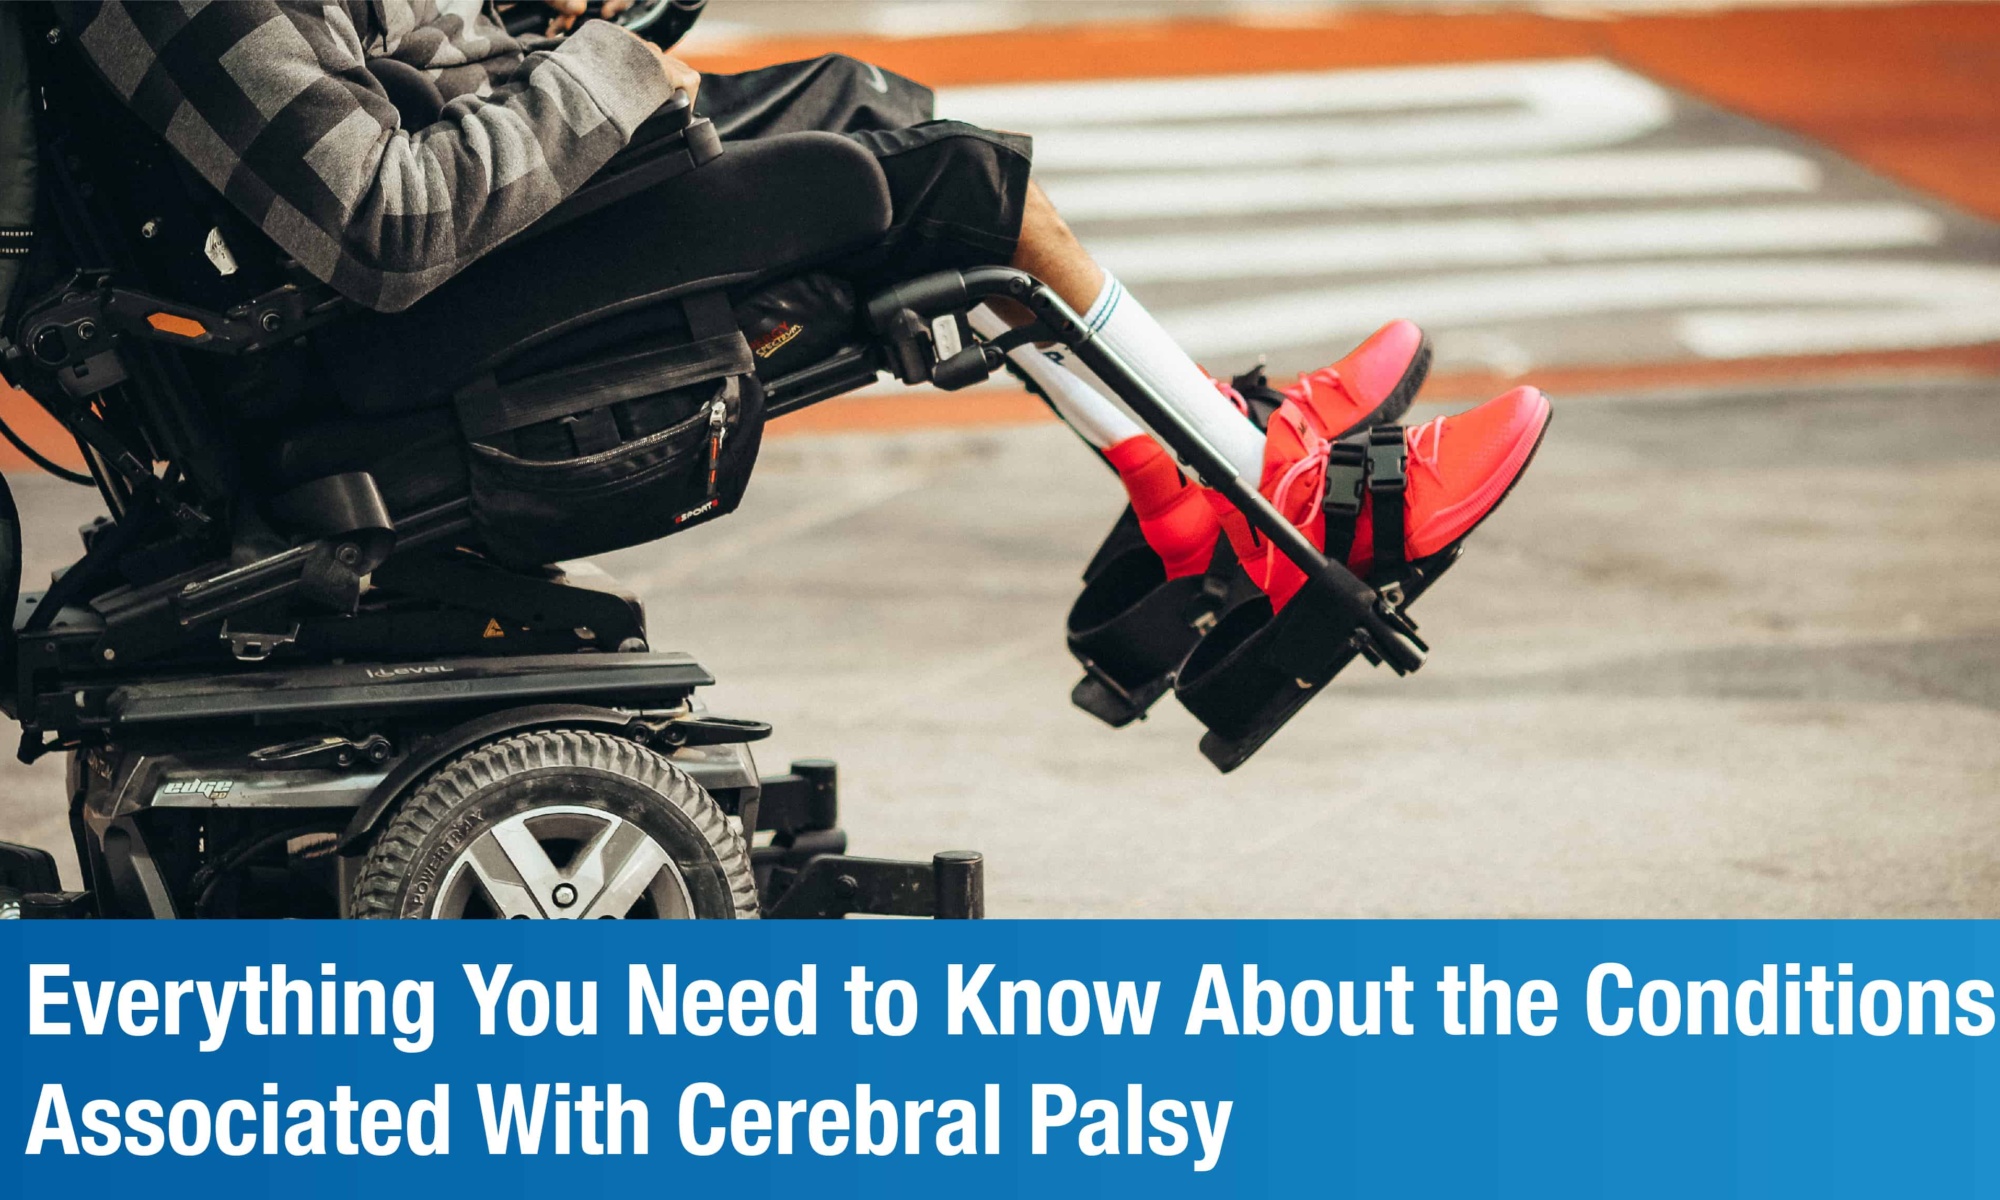 All About Cerebral Palsy’s Related Conditions